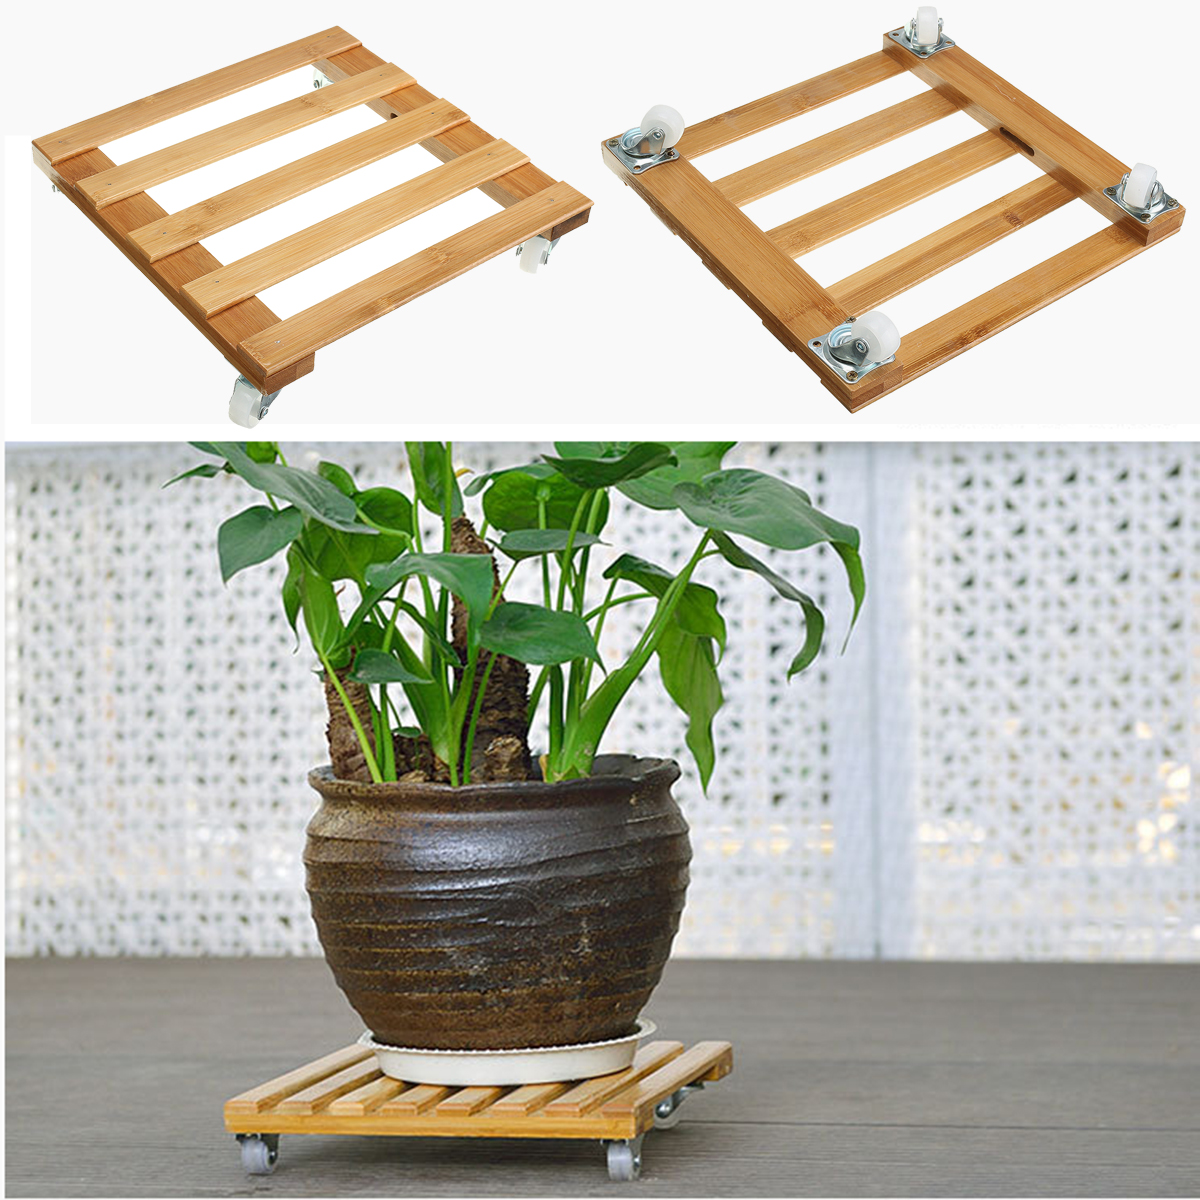 Flower-Plant-Pot-Stand-Base-Saucer-Tray-Rack-Roller-Moved-Pulley-Wheel-Garden-Decorations-1528838-4